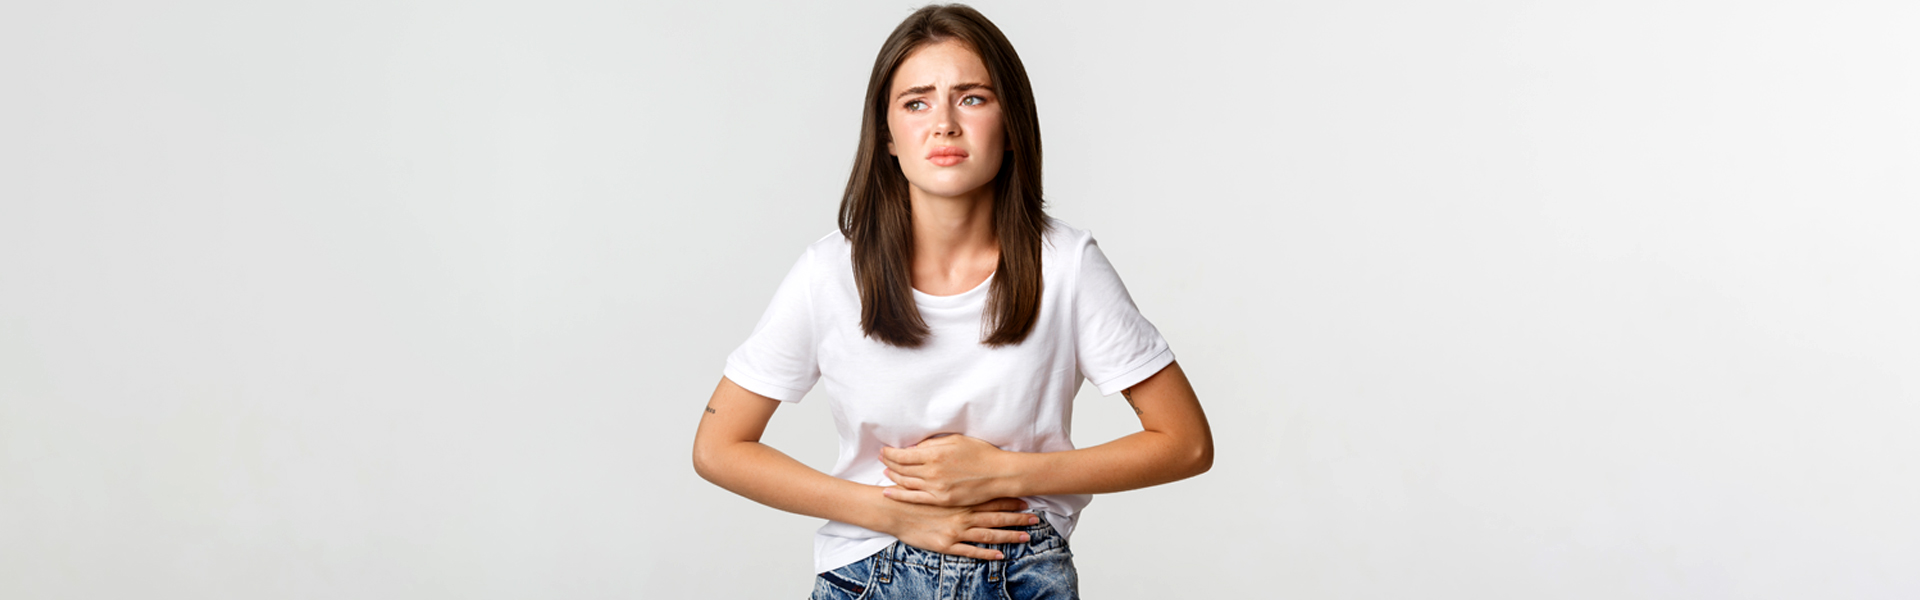 Kidney Stone and Abdominal Pain: Can Kidney Stones cause severe stomach pain?